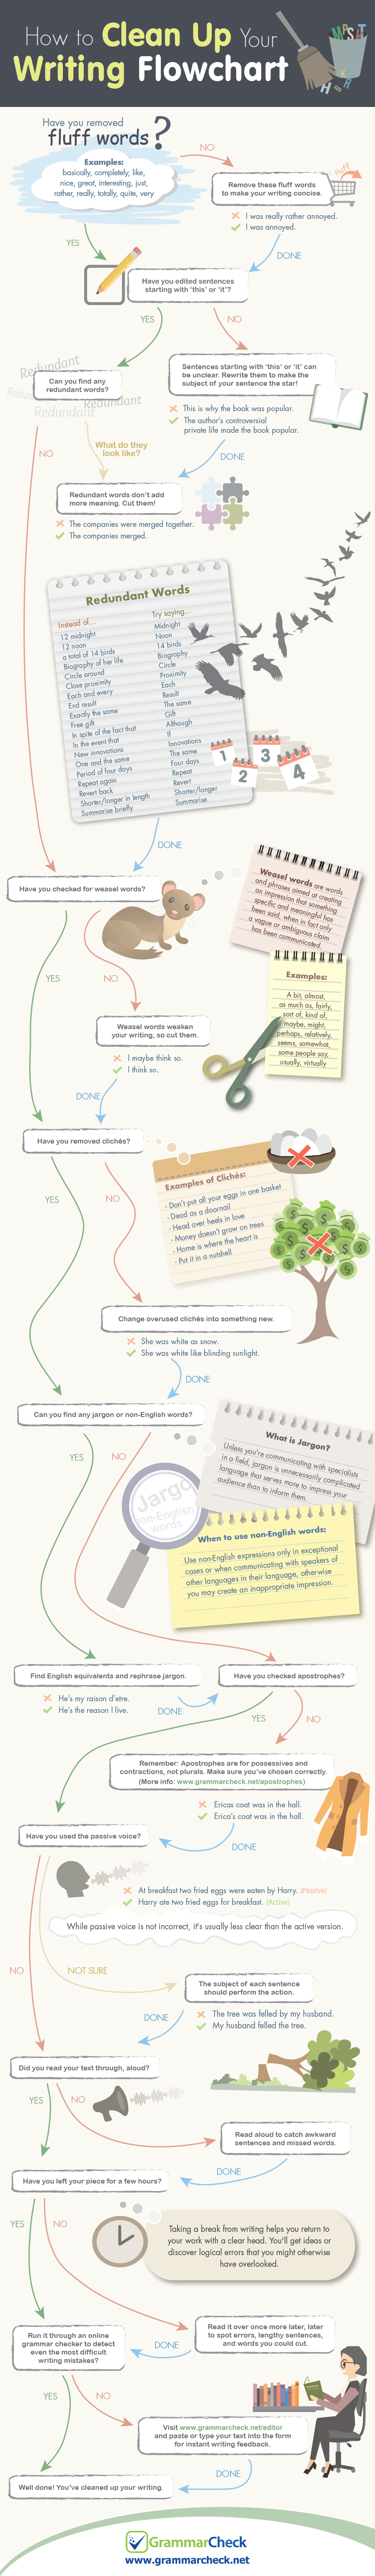 How to Clean Up Your Writing Flowchart (Infographic)